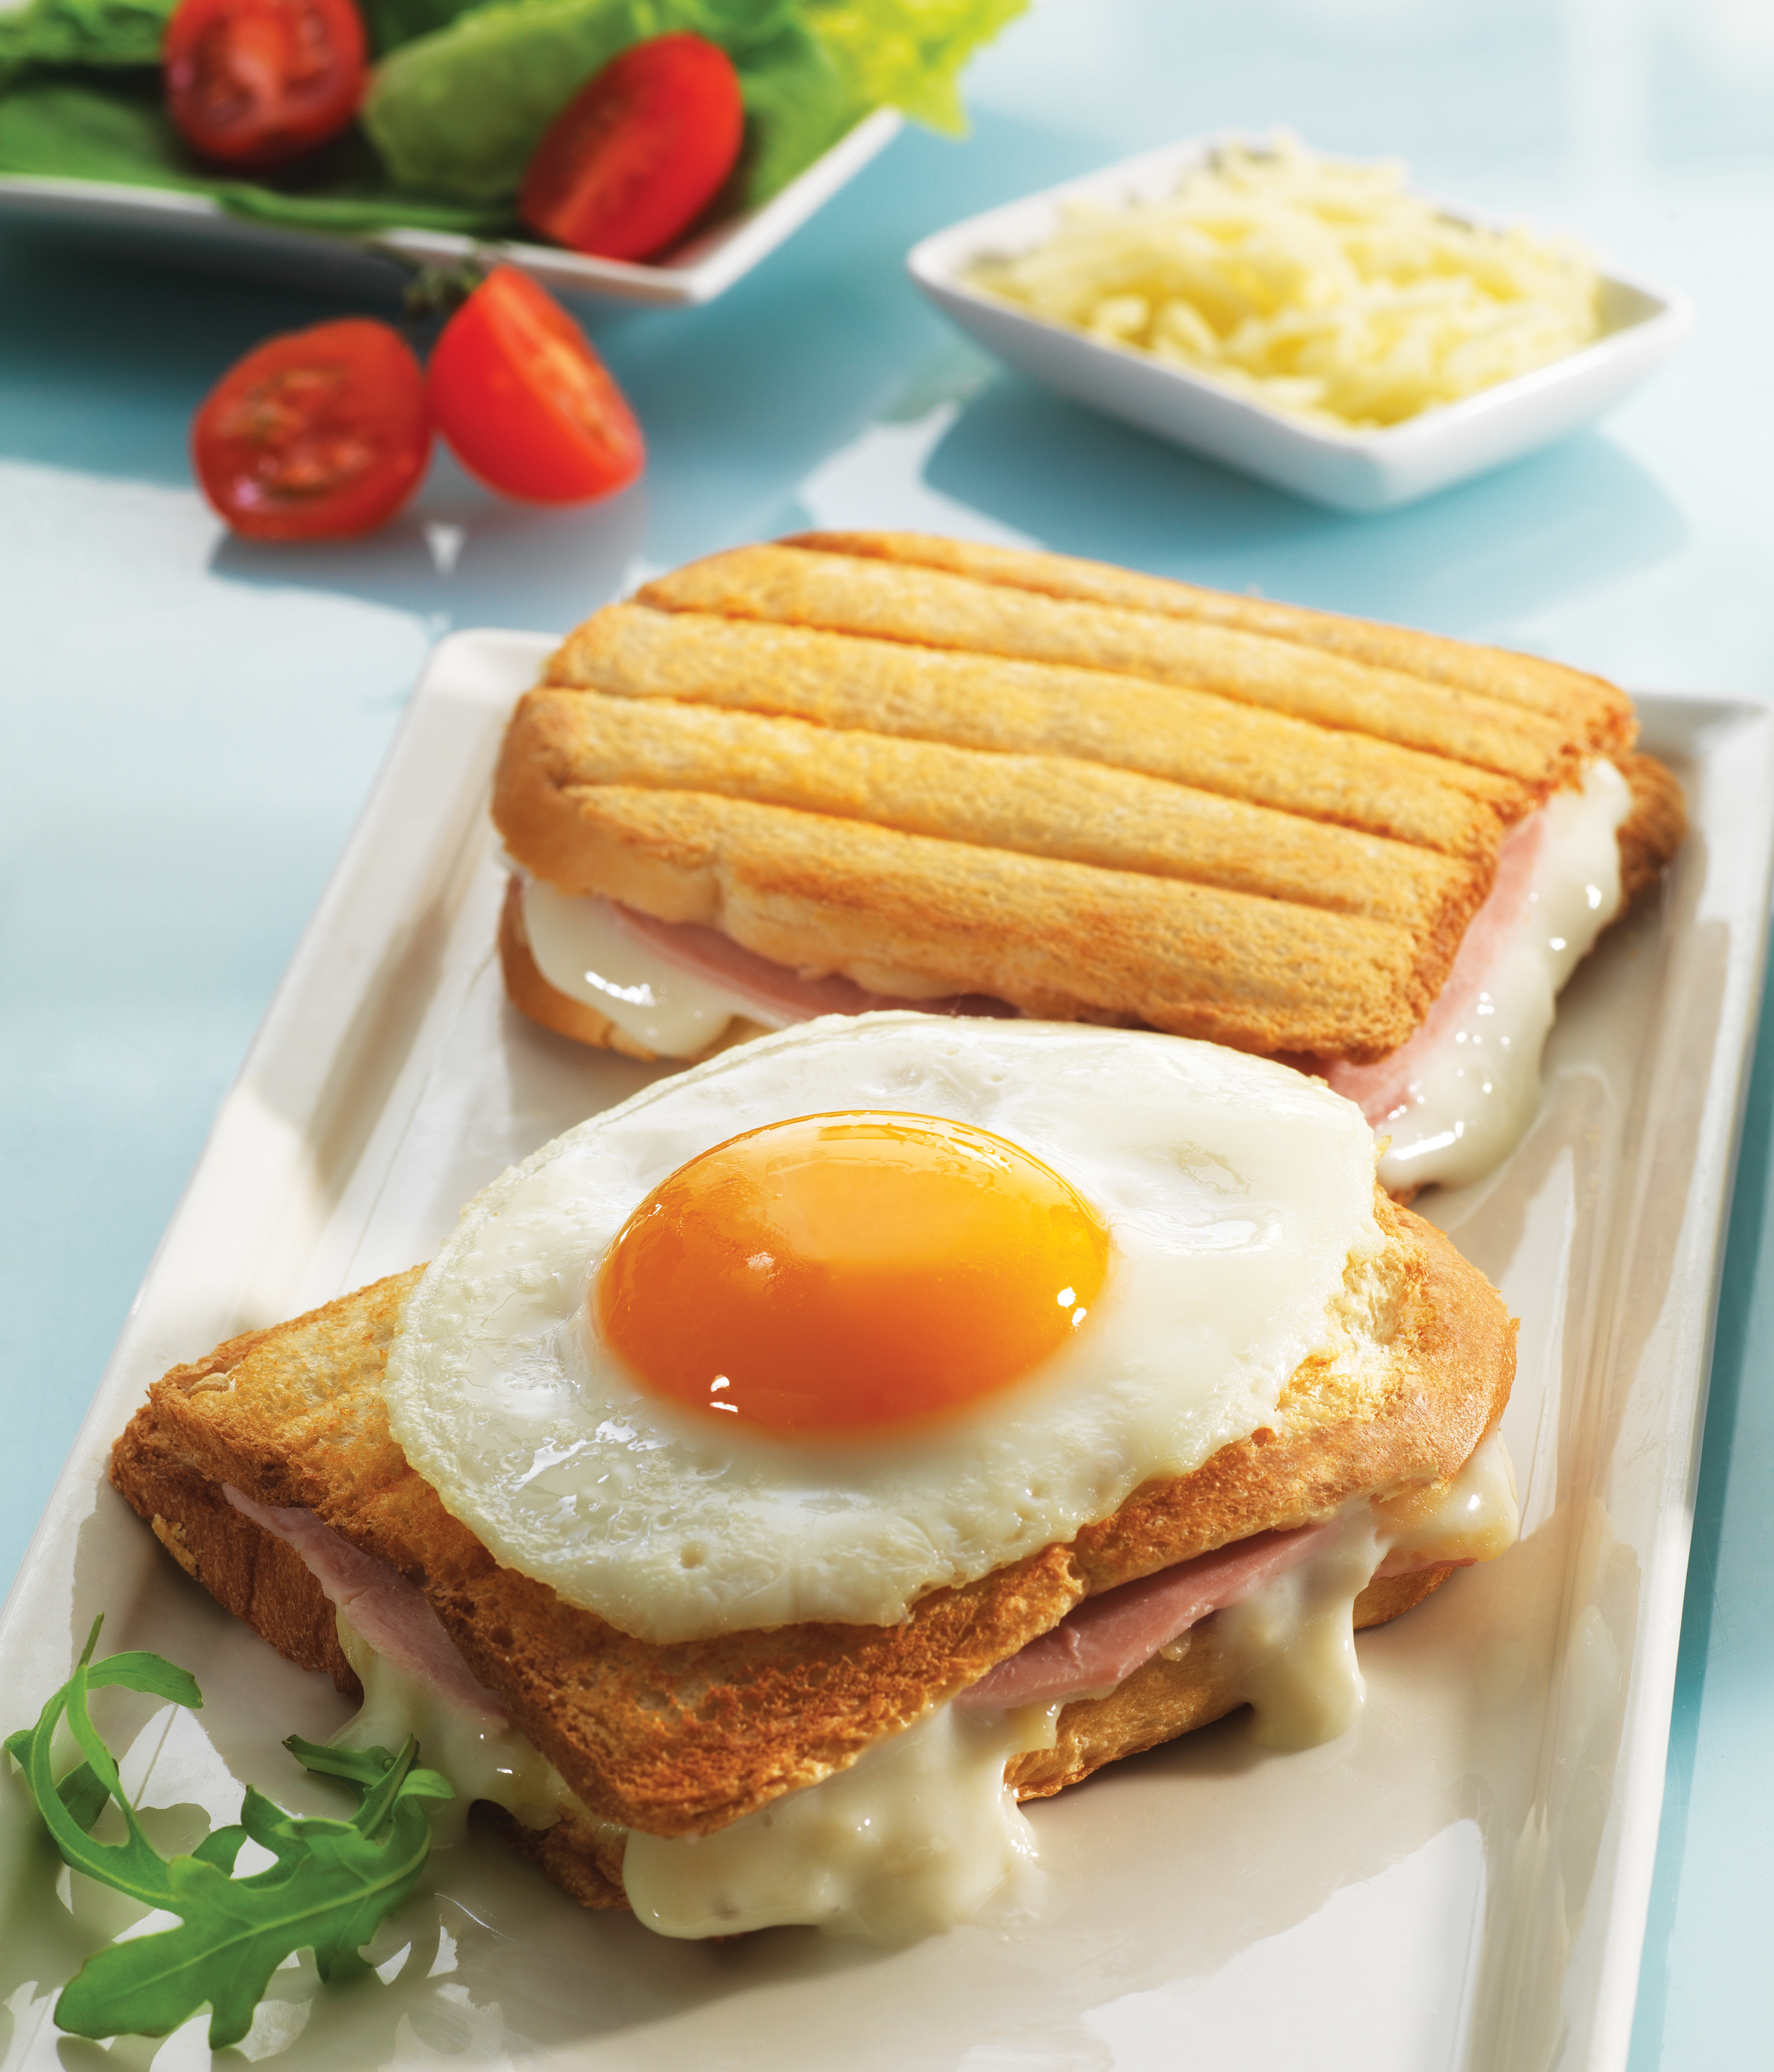 Tefal Snack Collection Accessory Plates - Croque Monsieur/Toasted Sandwich XA8001